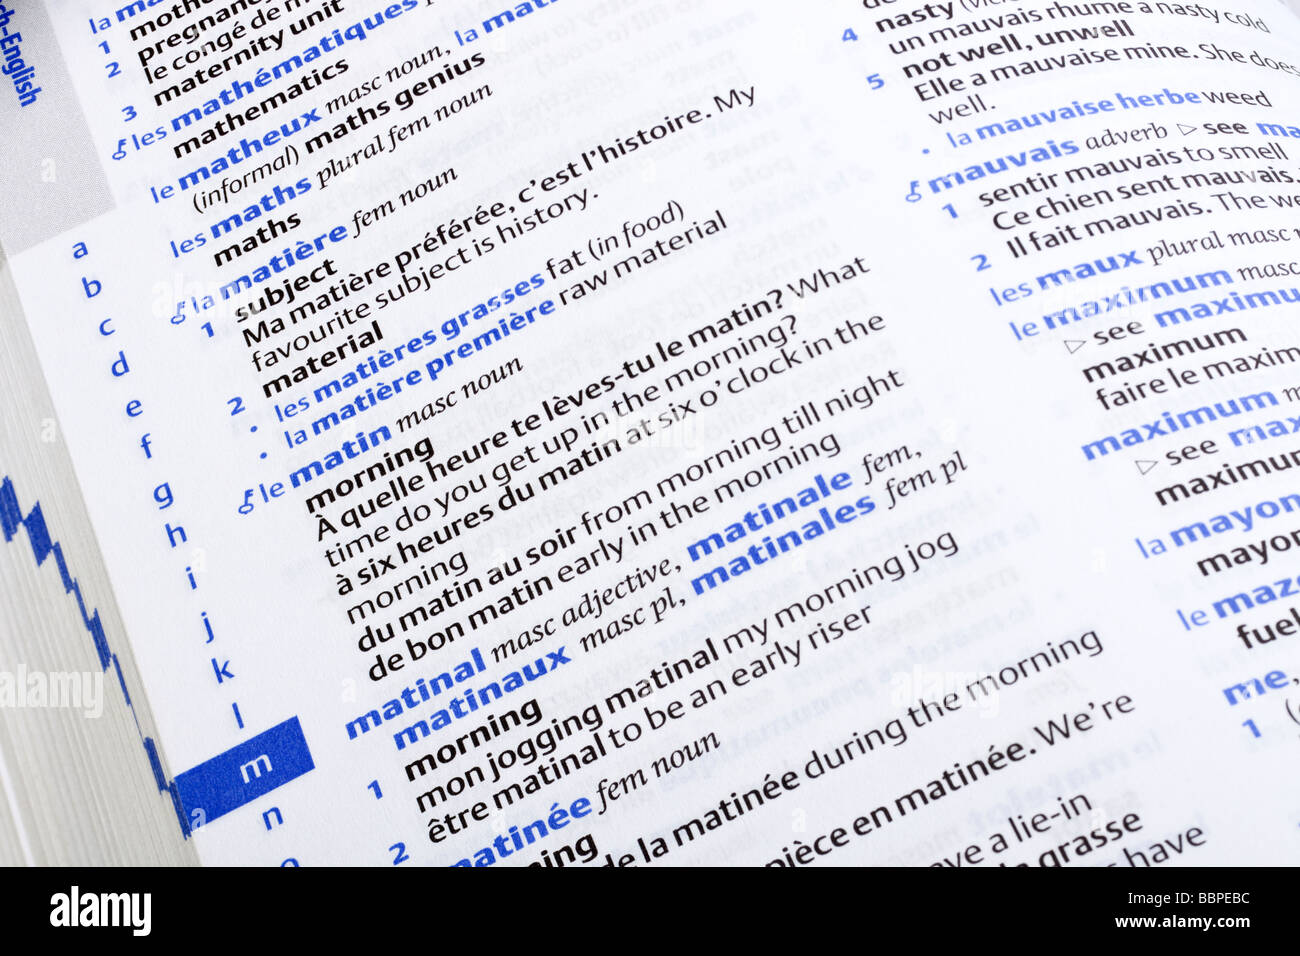 Close up of the pages of a French language to English dictionary close up Stock Photo